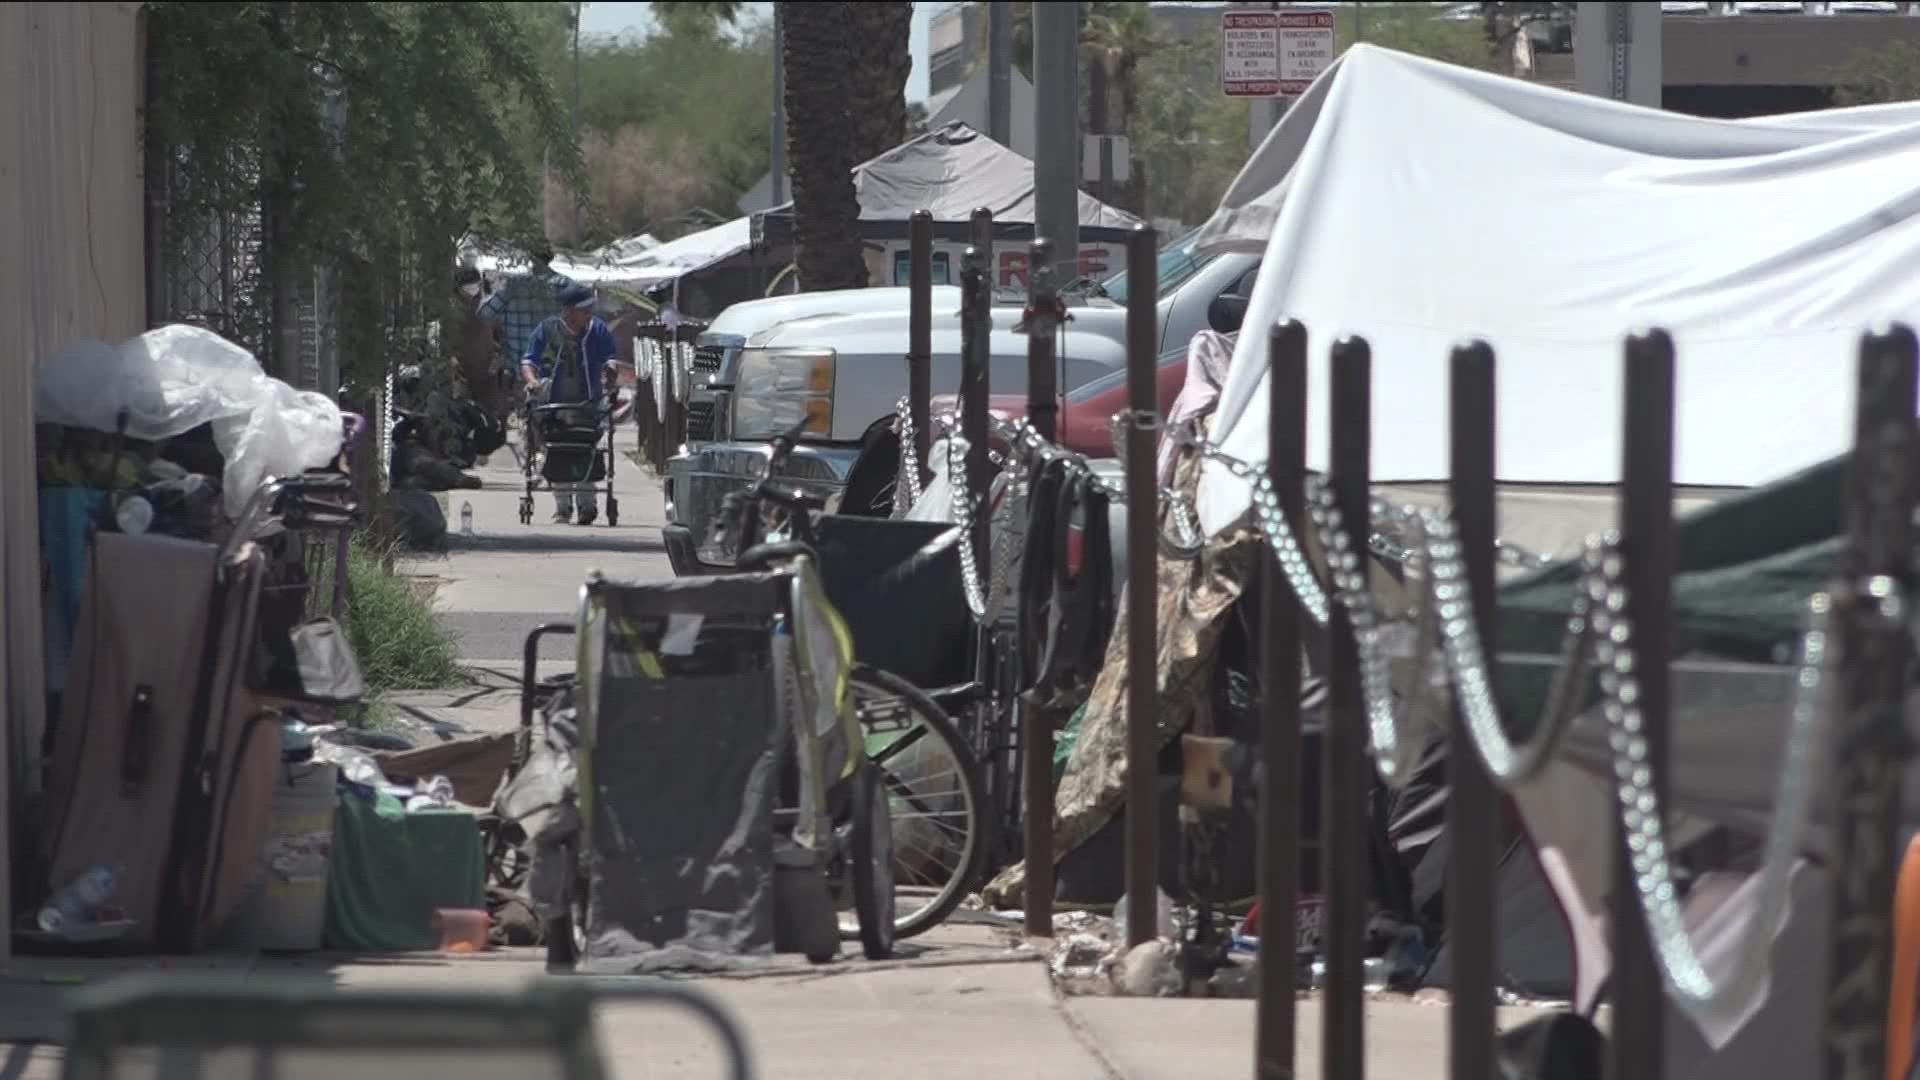 The city set aside money to help the issues of homelessness in Phoenix. But where does that money go? The 12News i-team digs deeper into the case.